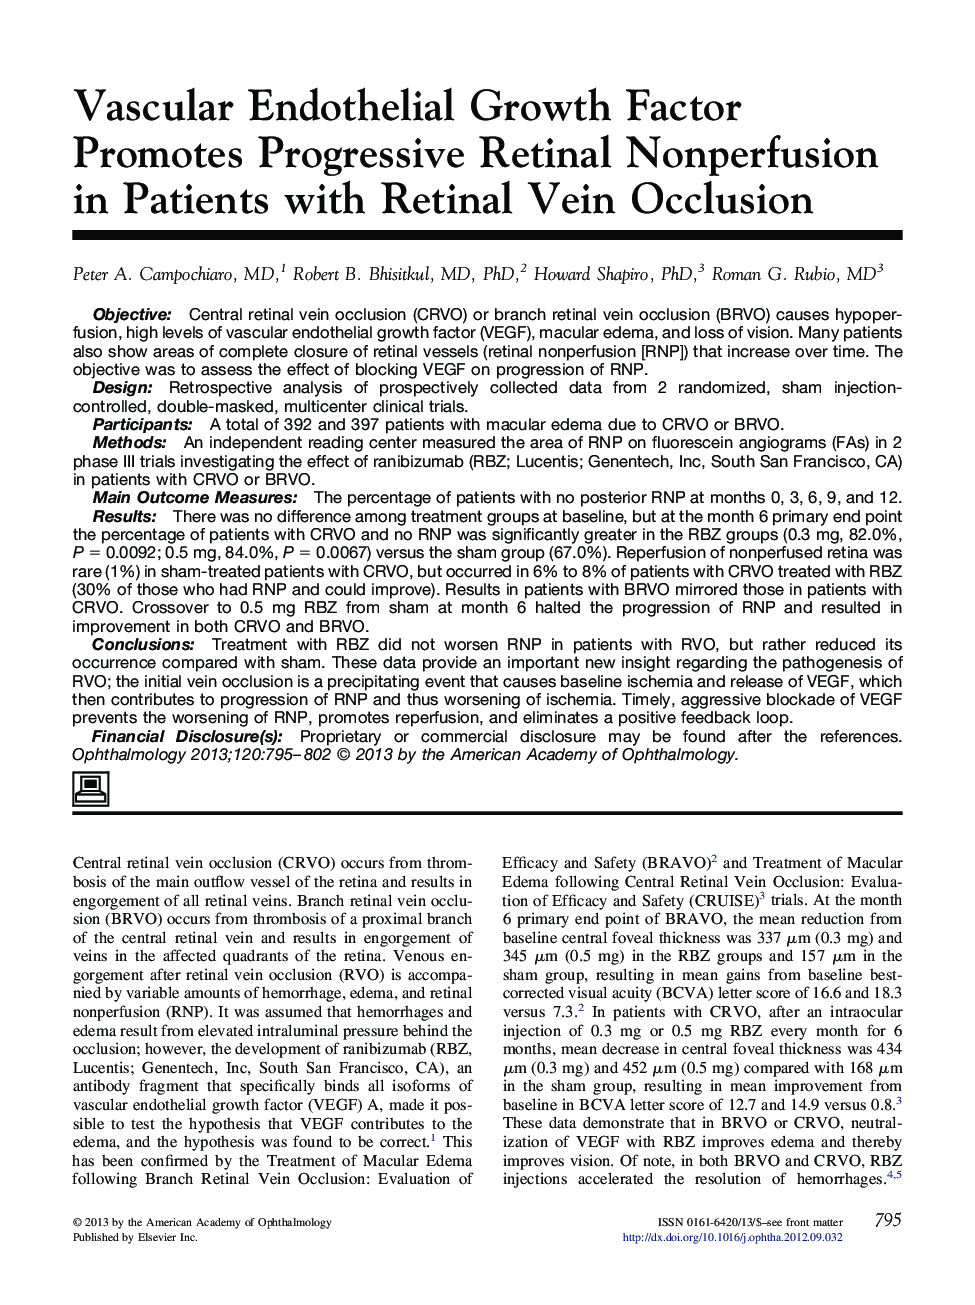 Vascular Endothelial Growth Factor Promotes Progressive Retinal Nonperfusion in Patients with Retinal Vein Occlusion